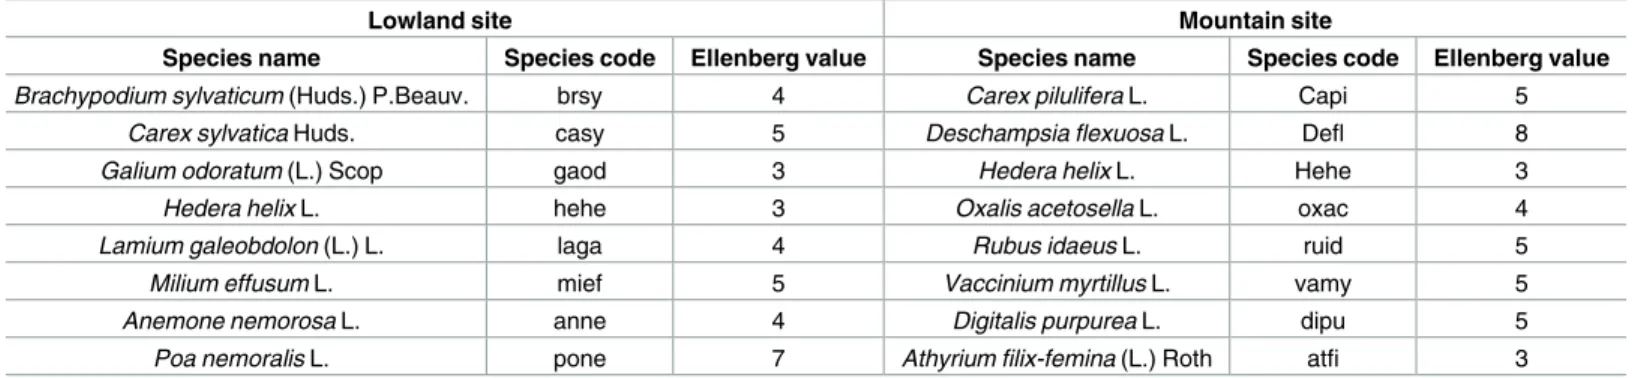 Table 2. List of the eight most abundant species at each study site. Species are ranked in order of decreasing abundance.